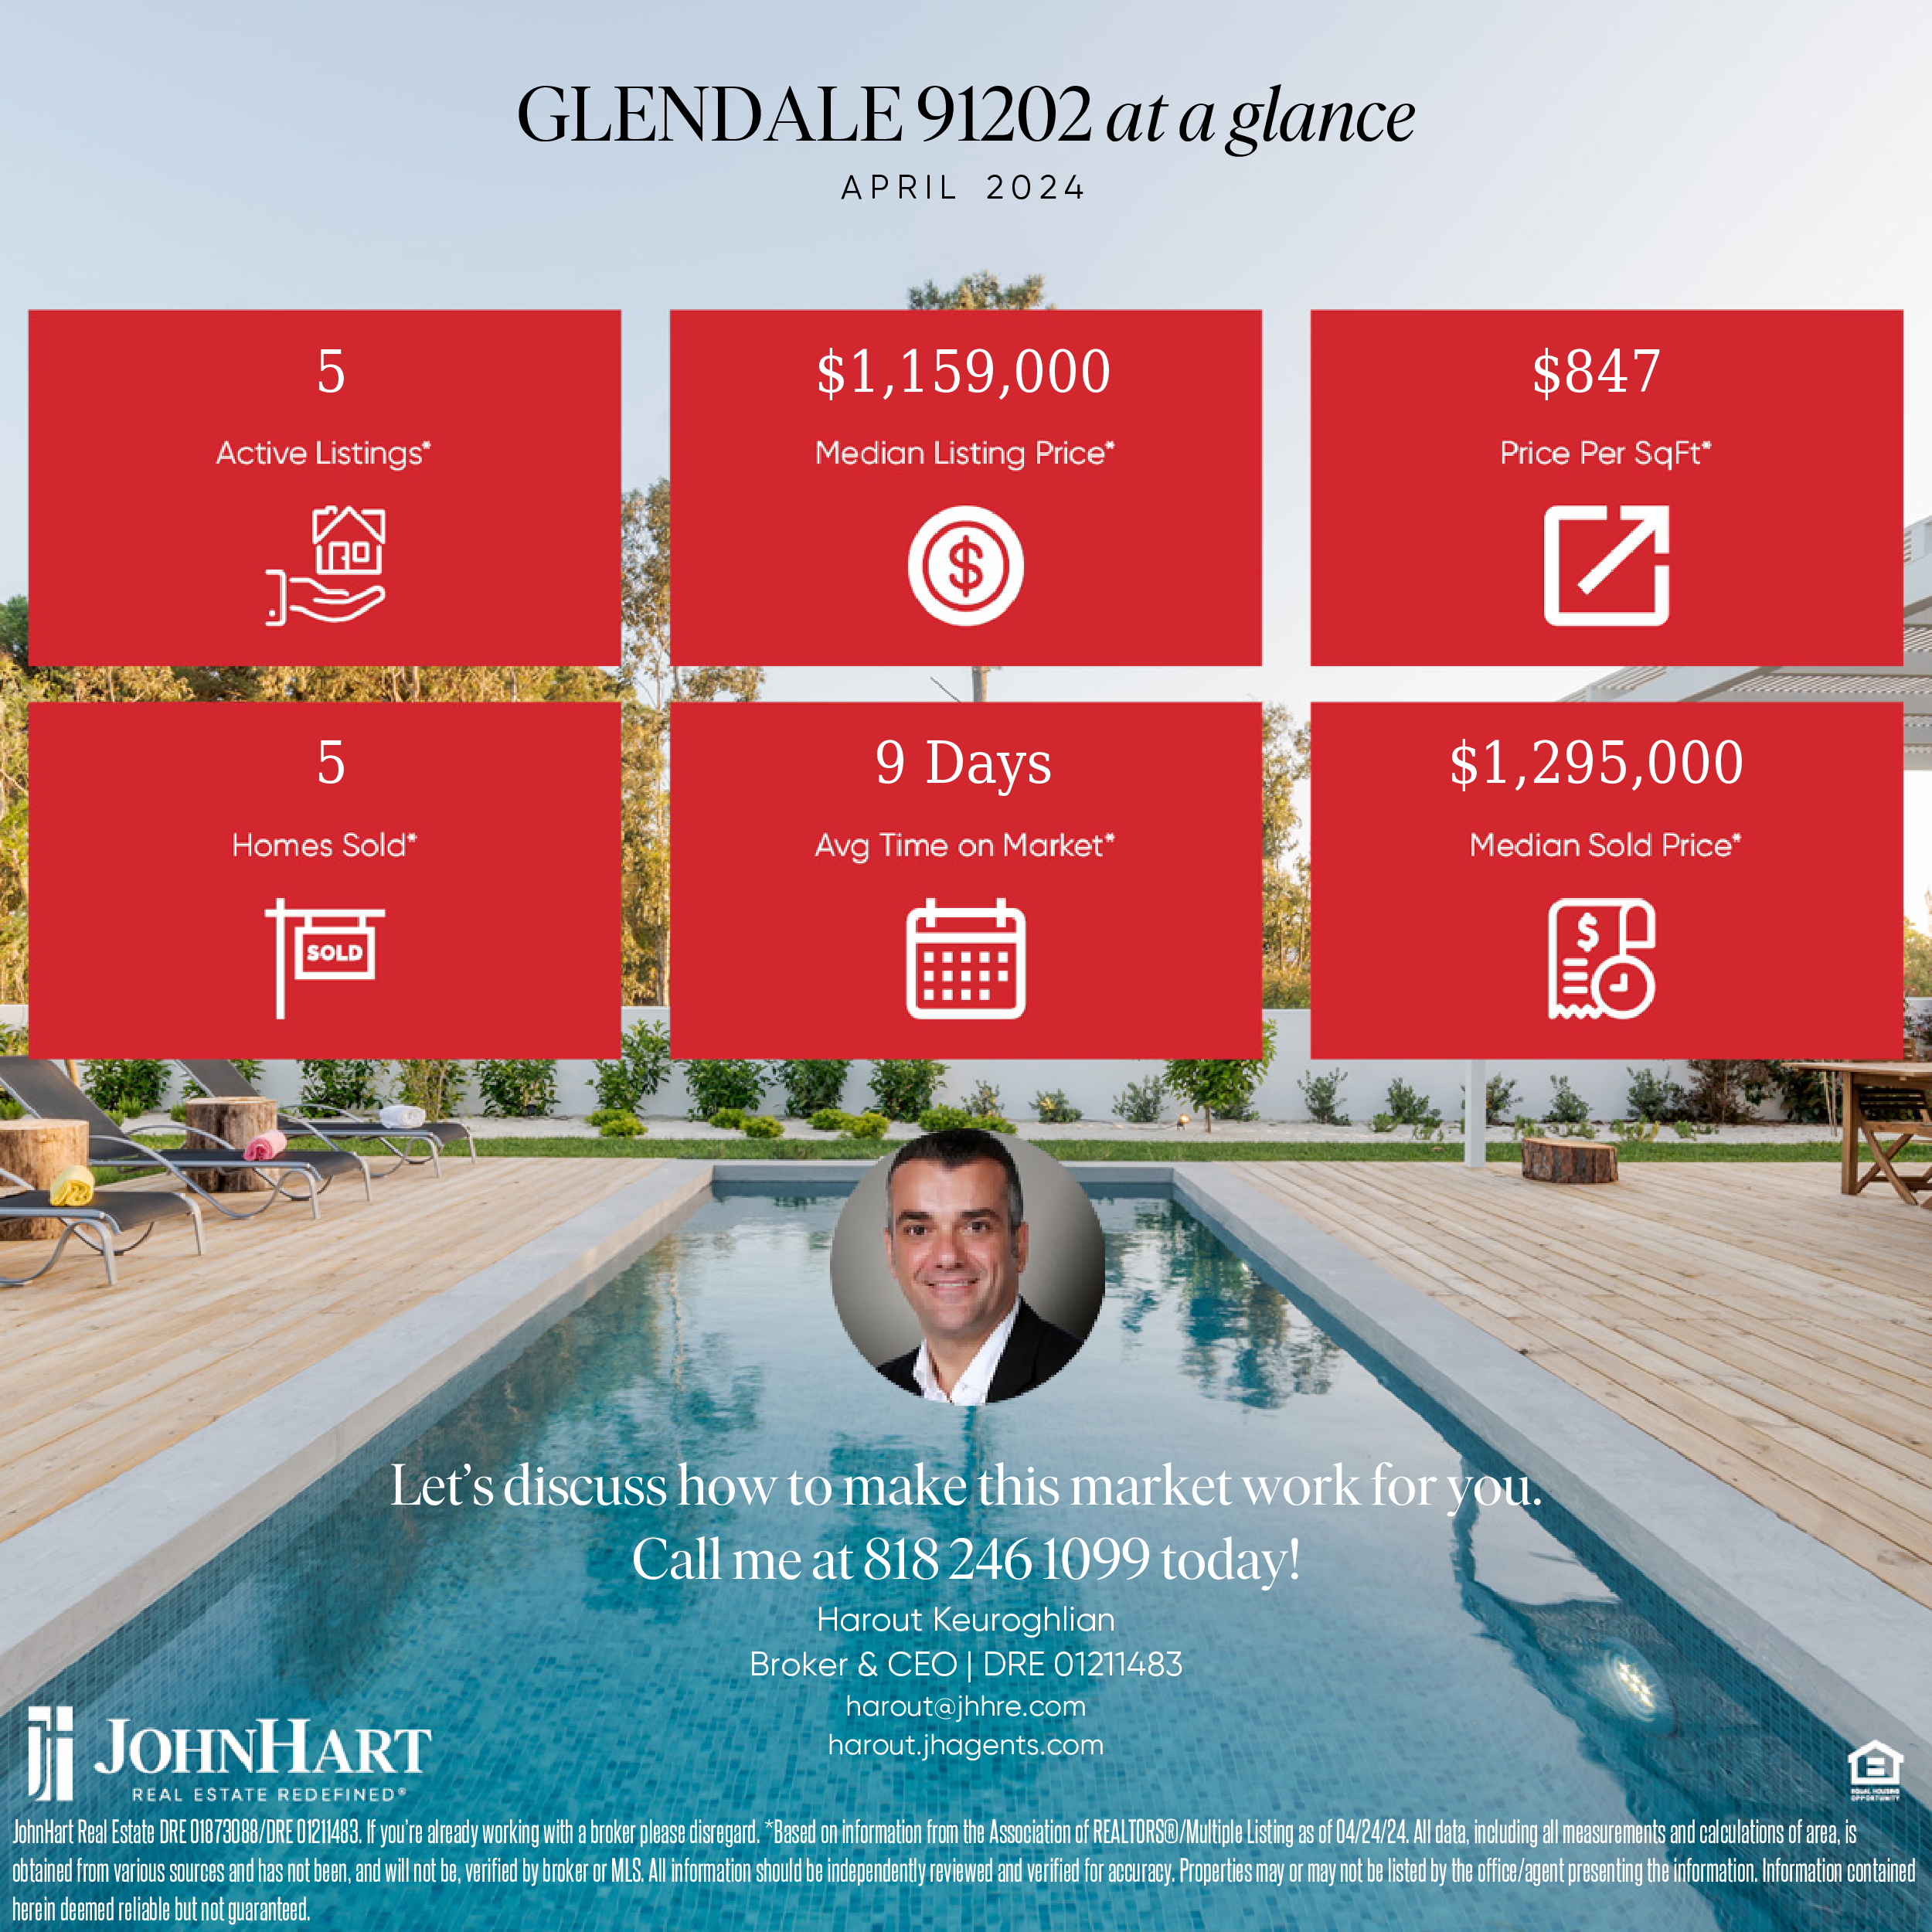 glendale-91202-real-estate-update-march-25-to-april-24